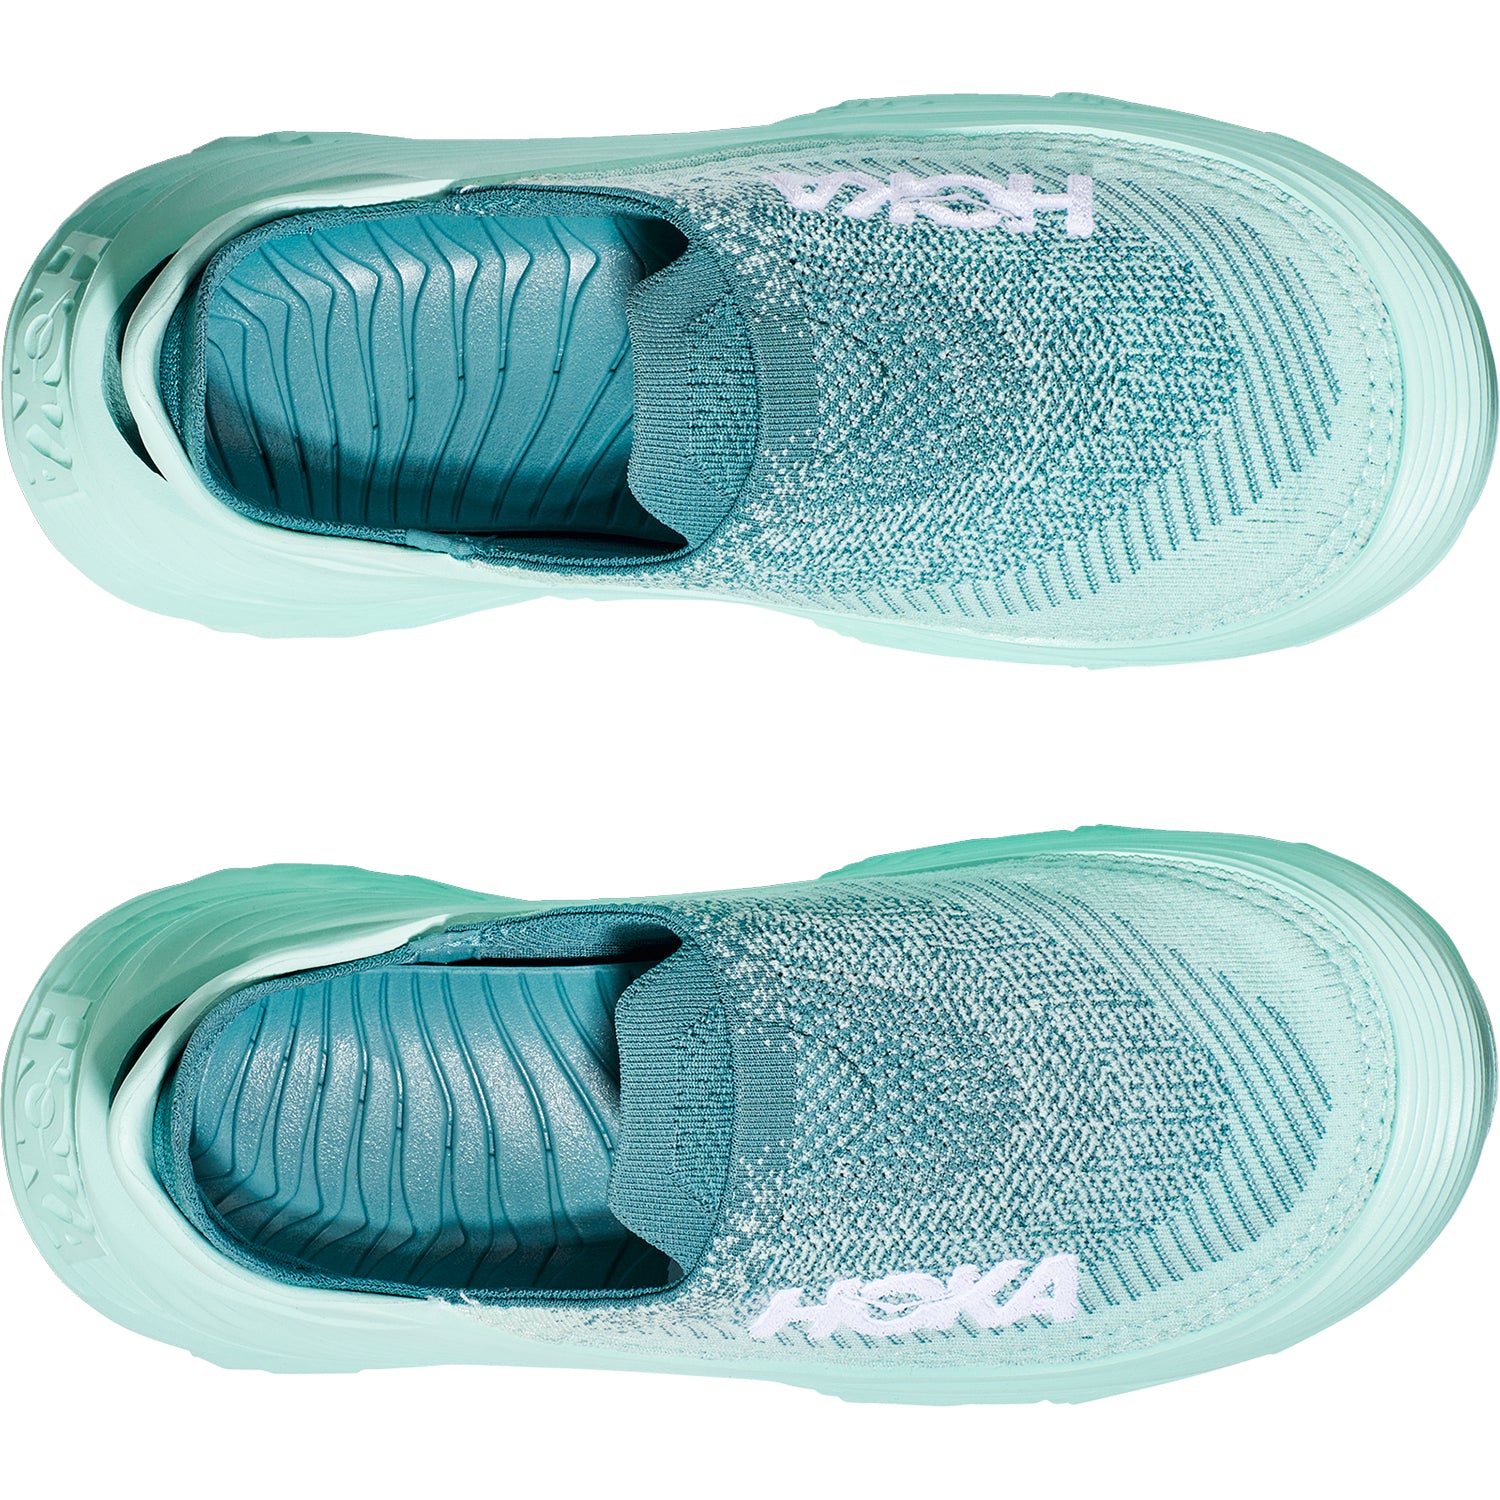 Adidas Creates World's First Shoe Upper Made of Recycled Ocean Plastic -  Environment+Energy Leader